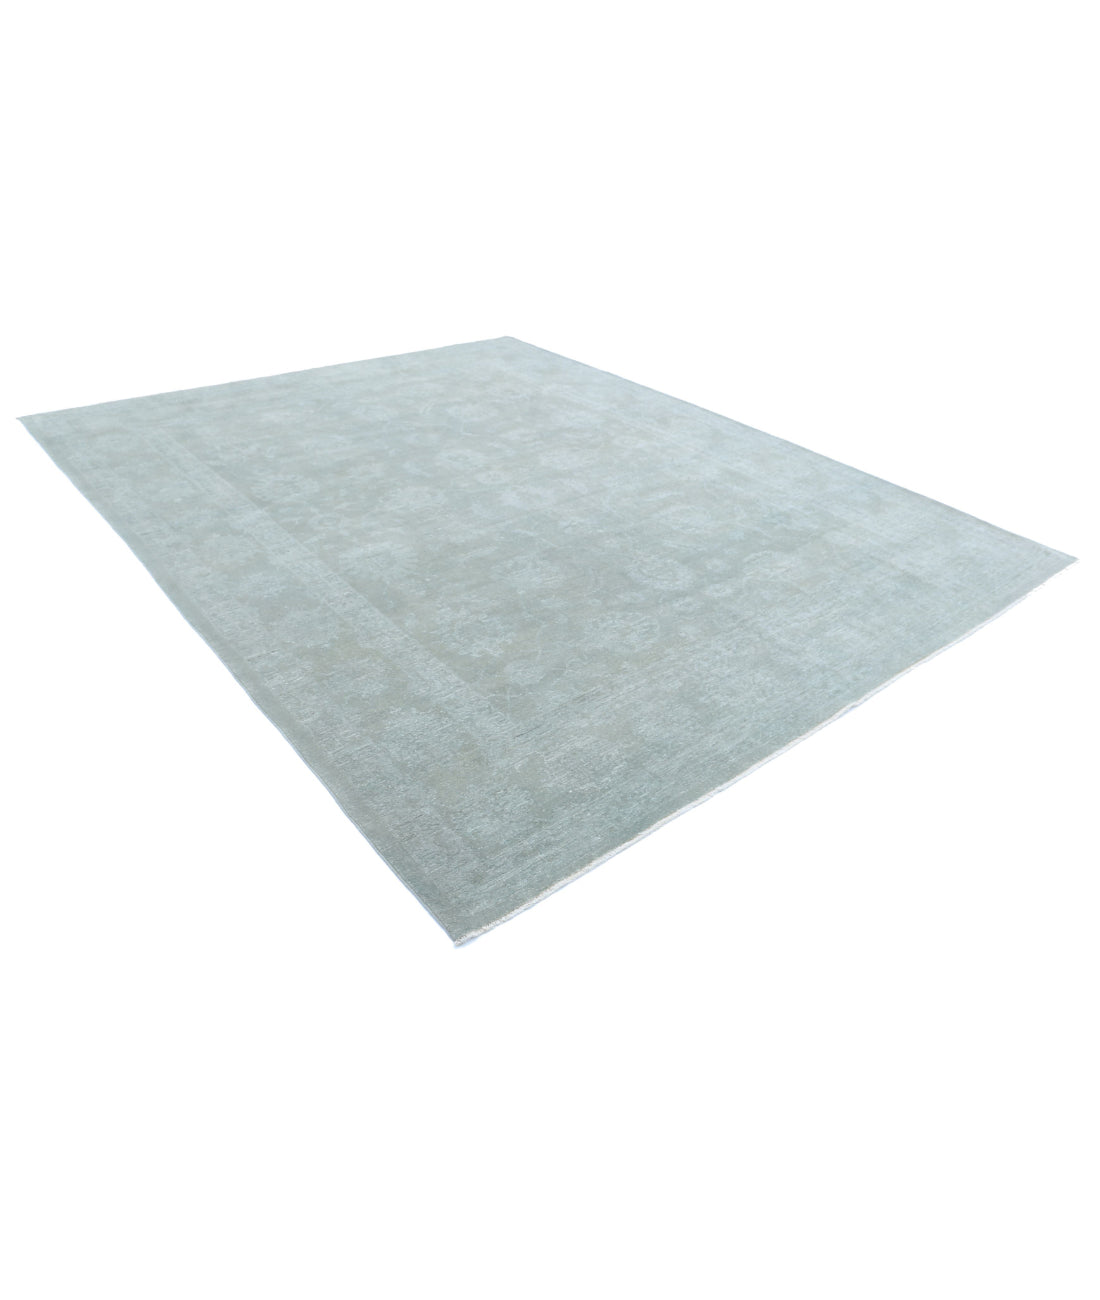 Overdye 9'1'' X 11'4'' Hand-Knotted Wool Rug 9'1'' x 11'4'' (273 X 340) / Green / N/A